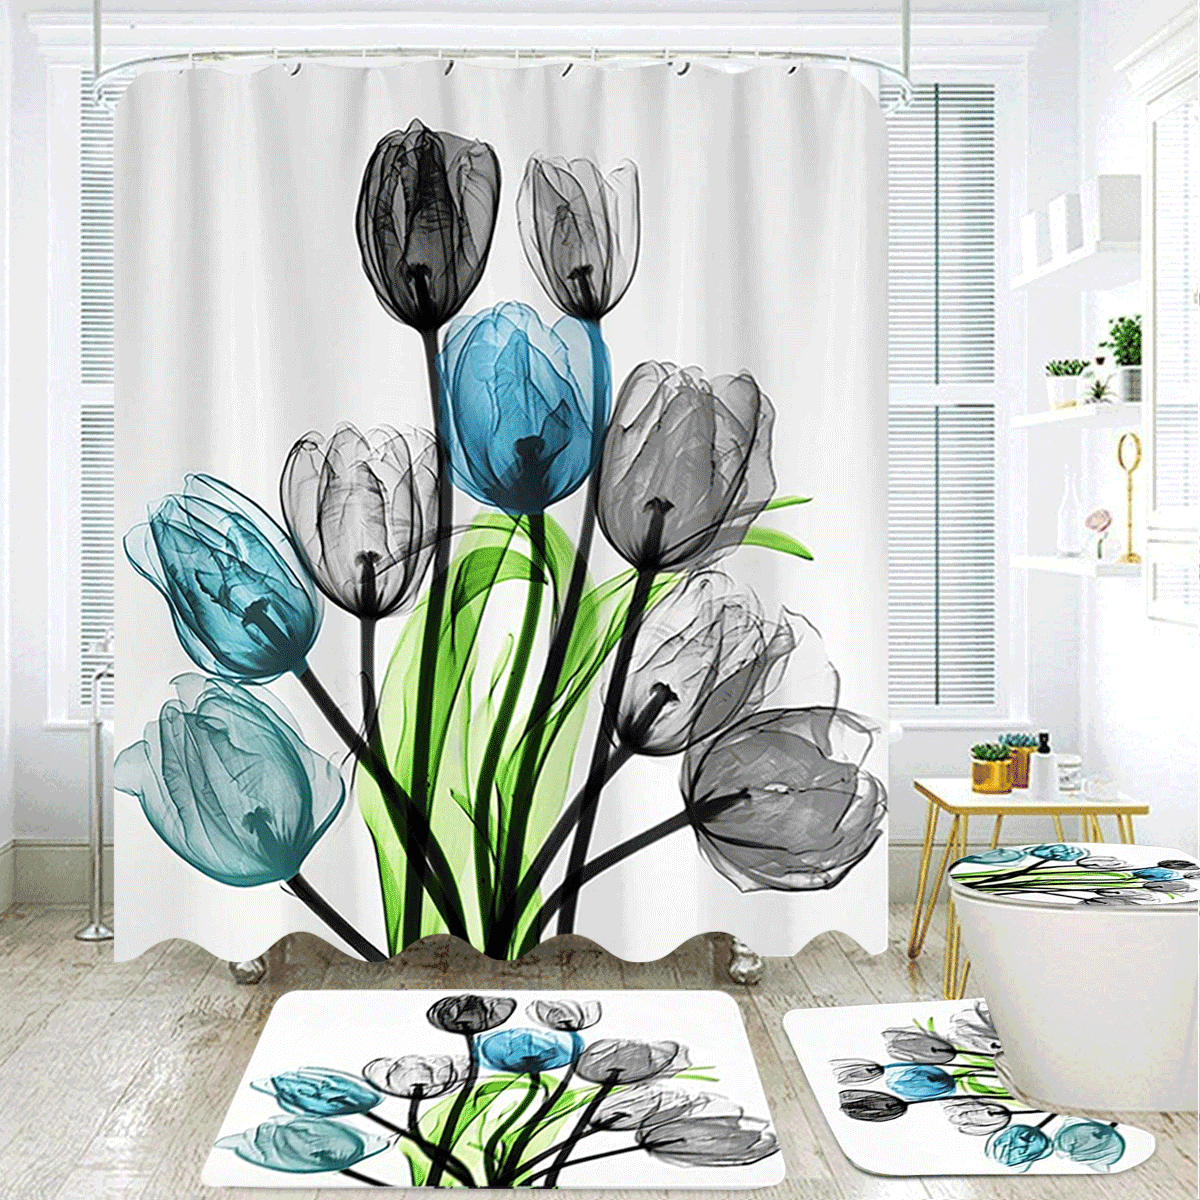 The Hand Painted Tulip Waterproof Fabric Home Decor Shower Curtain Bathroom Mat 